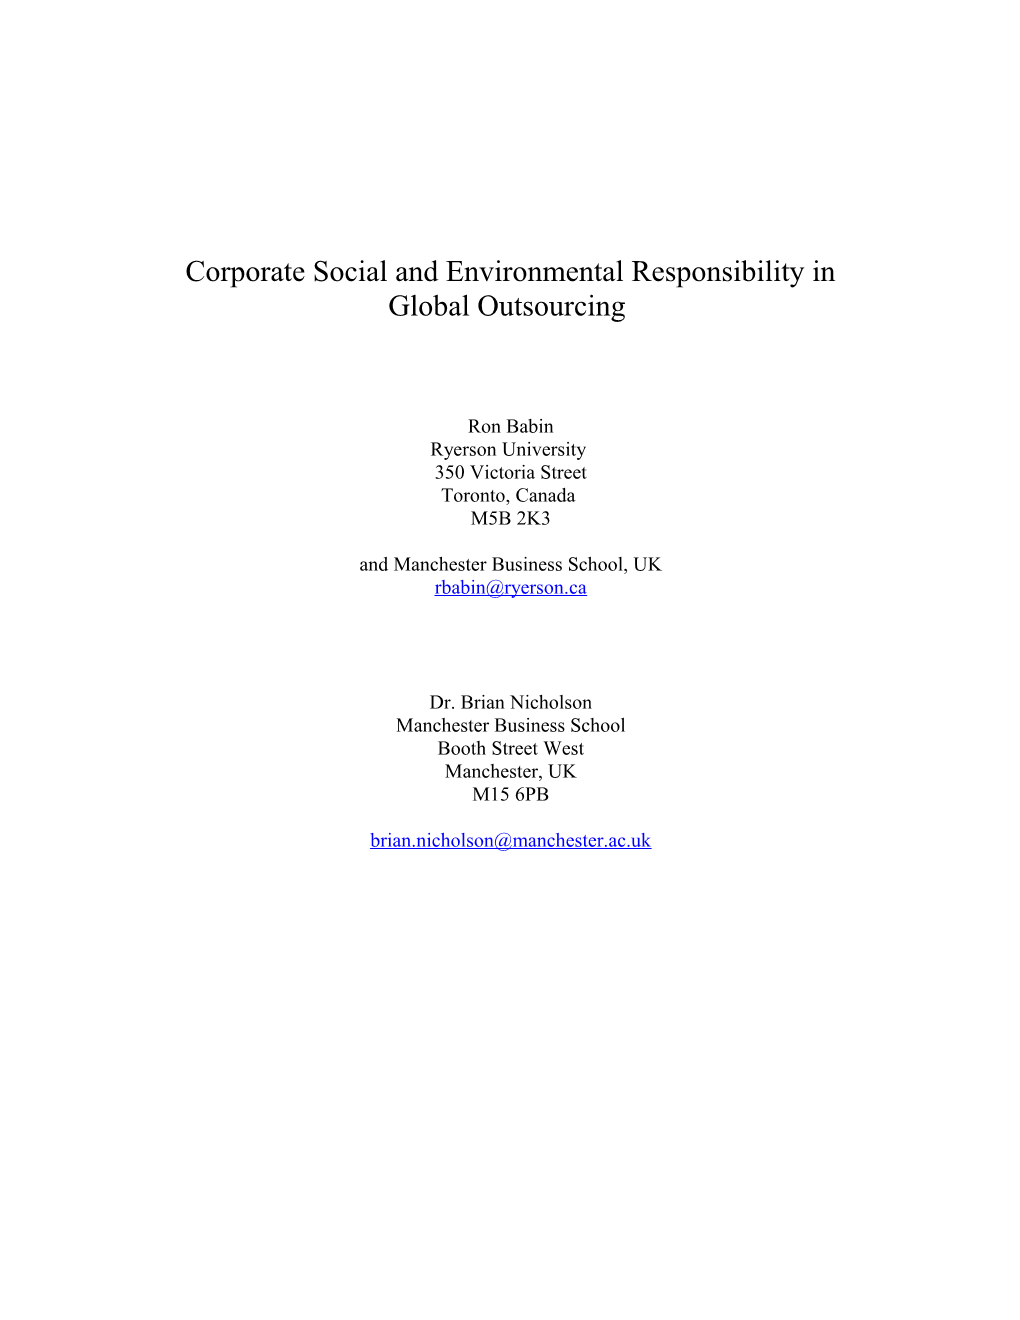 Corporate Social and Environmental Responsibility in Global Outsourcing